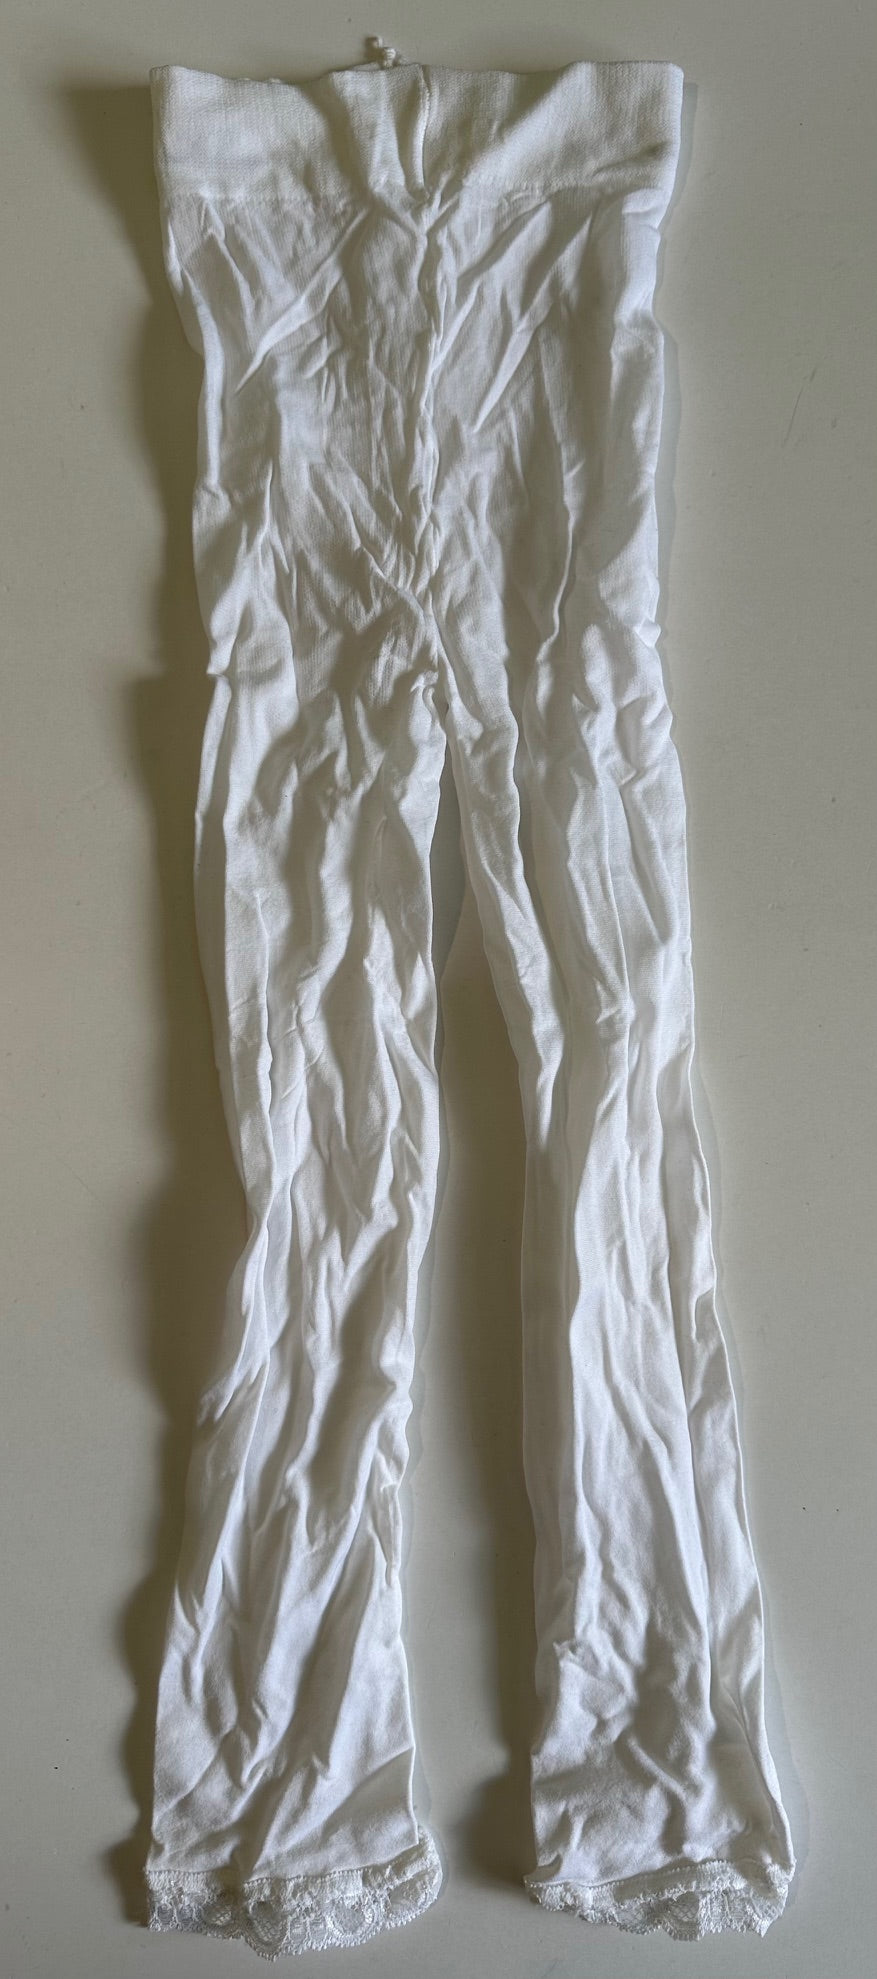 Unknown Brand, White Tights with Lace Bottoms - Size 2-4